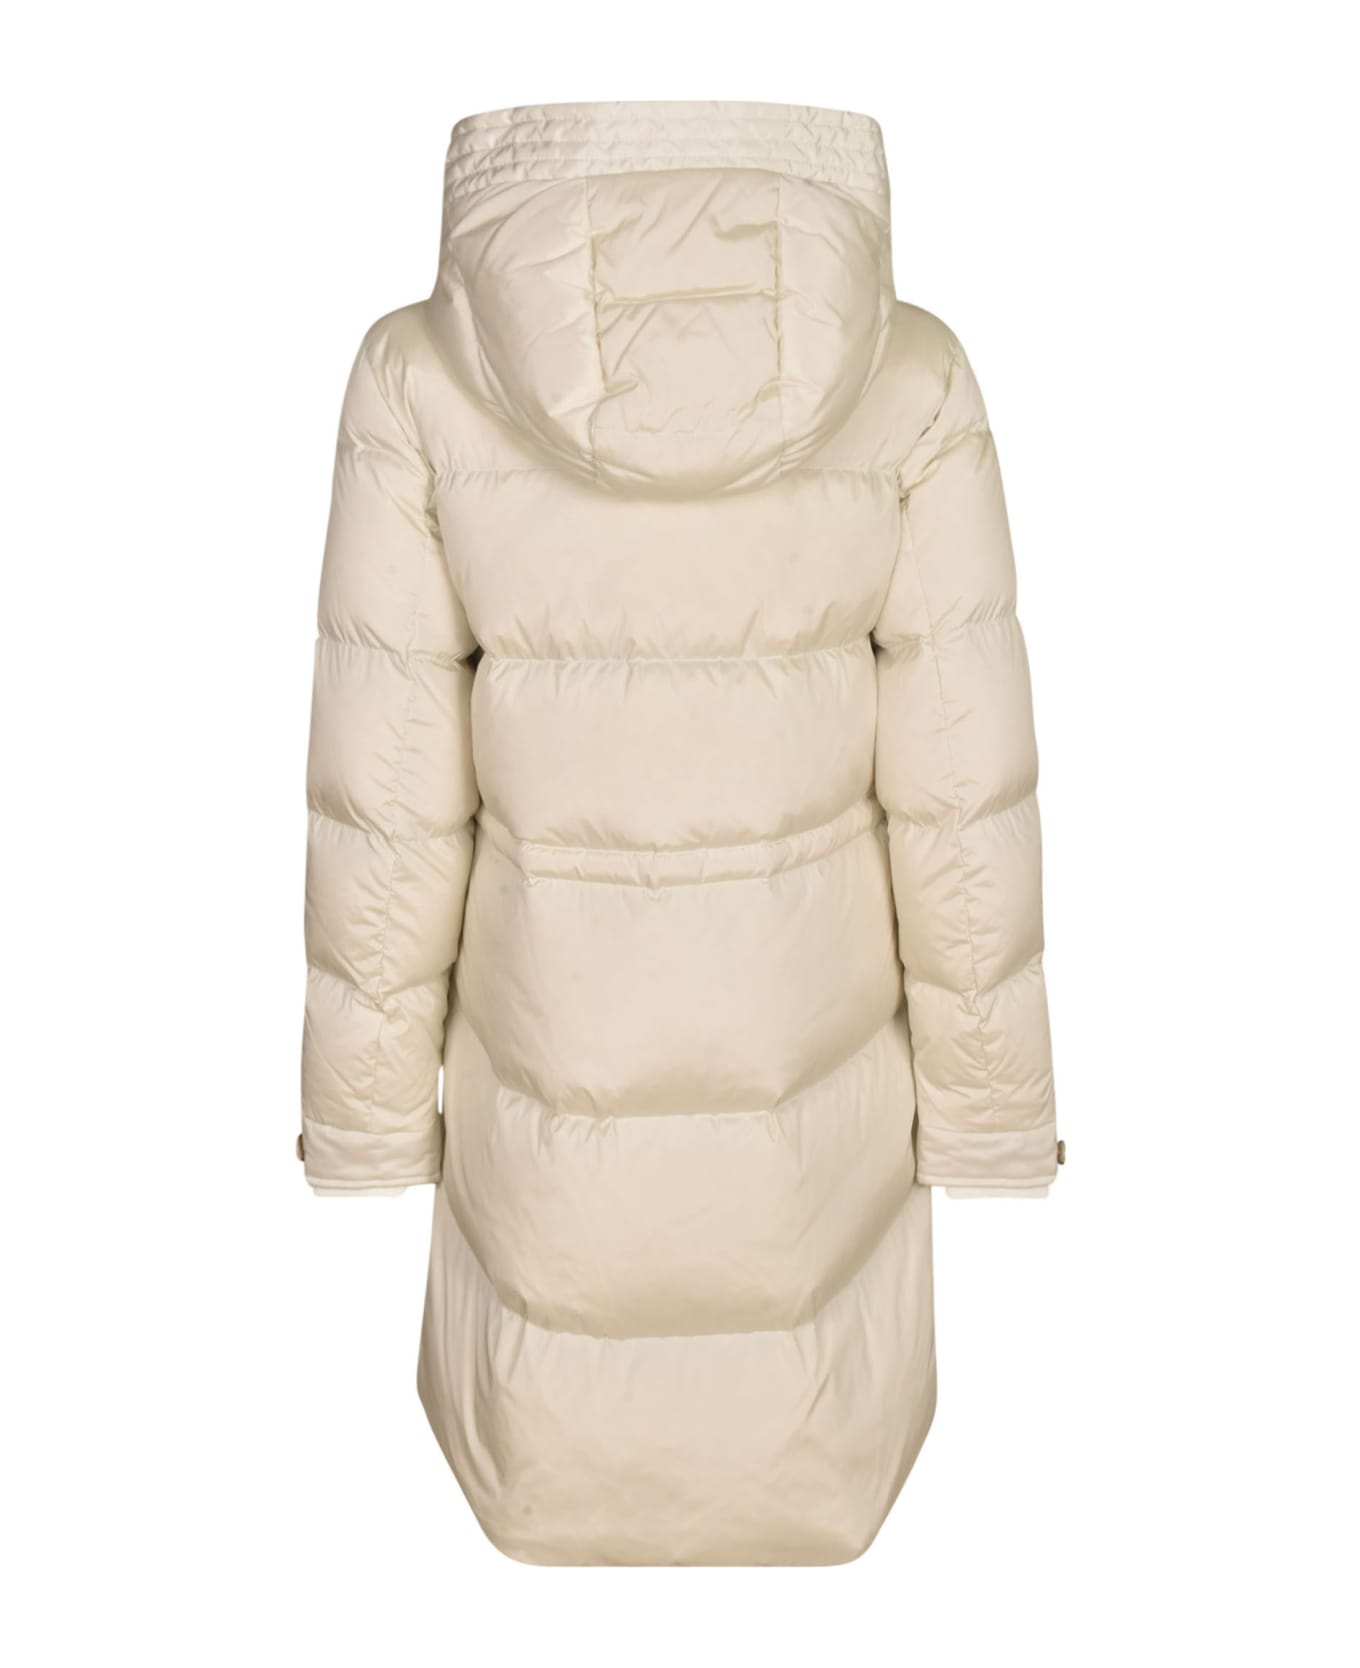 Woolrich Concealed Long Padded Jacket - Cream